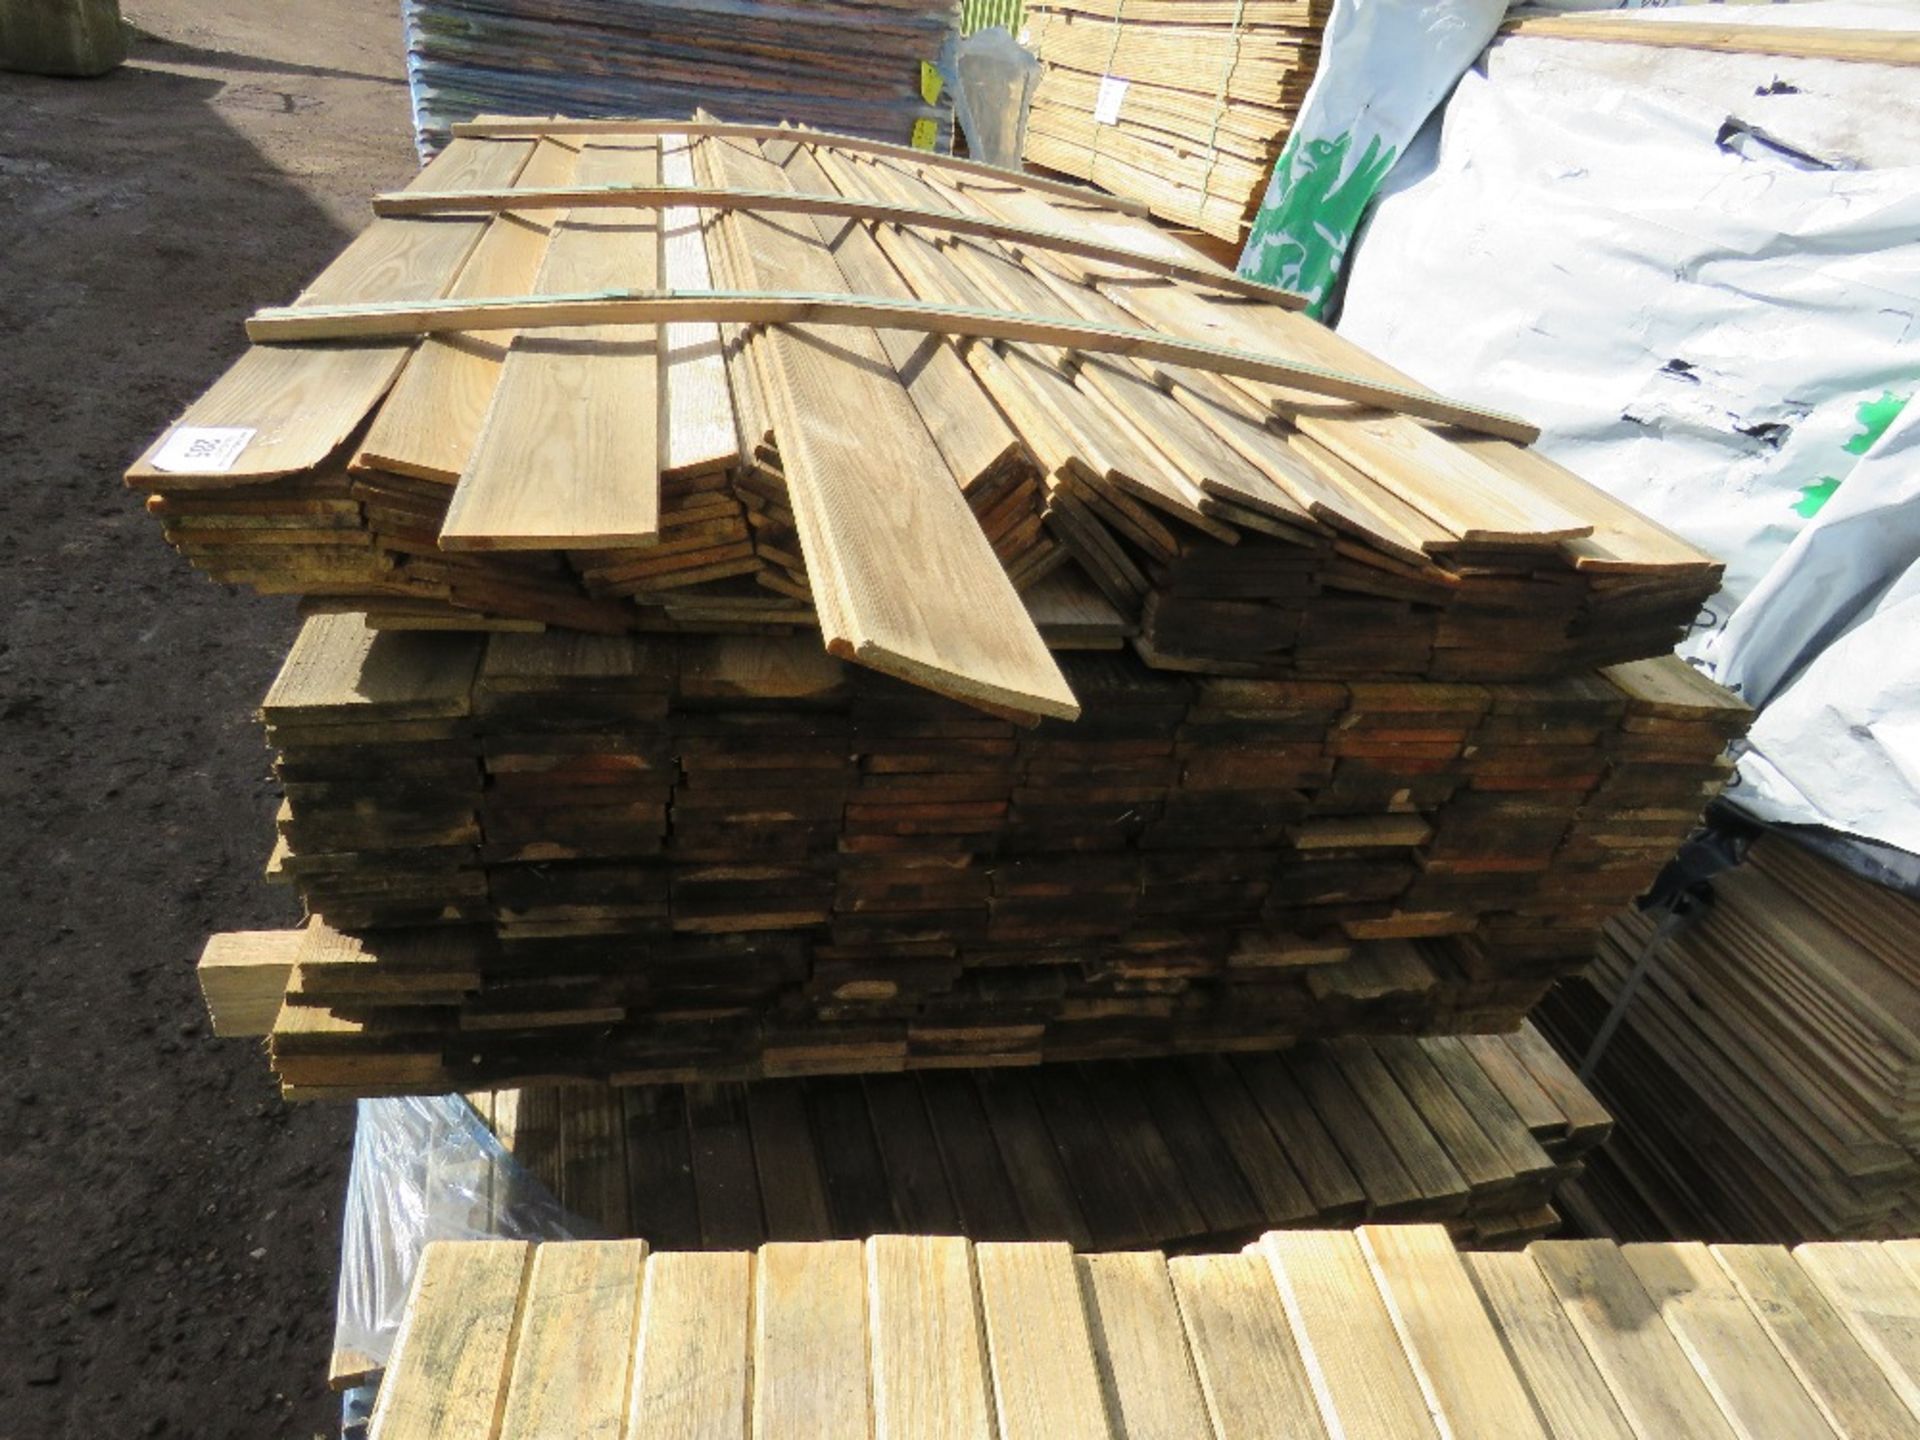 STACK OF UNTREATED MIXED CLADDING TIMBER 1.44-1.83M APPROX. - Image 2 of 3